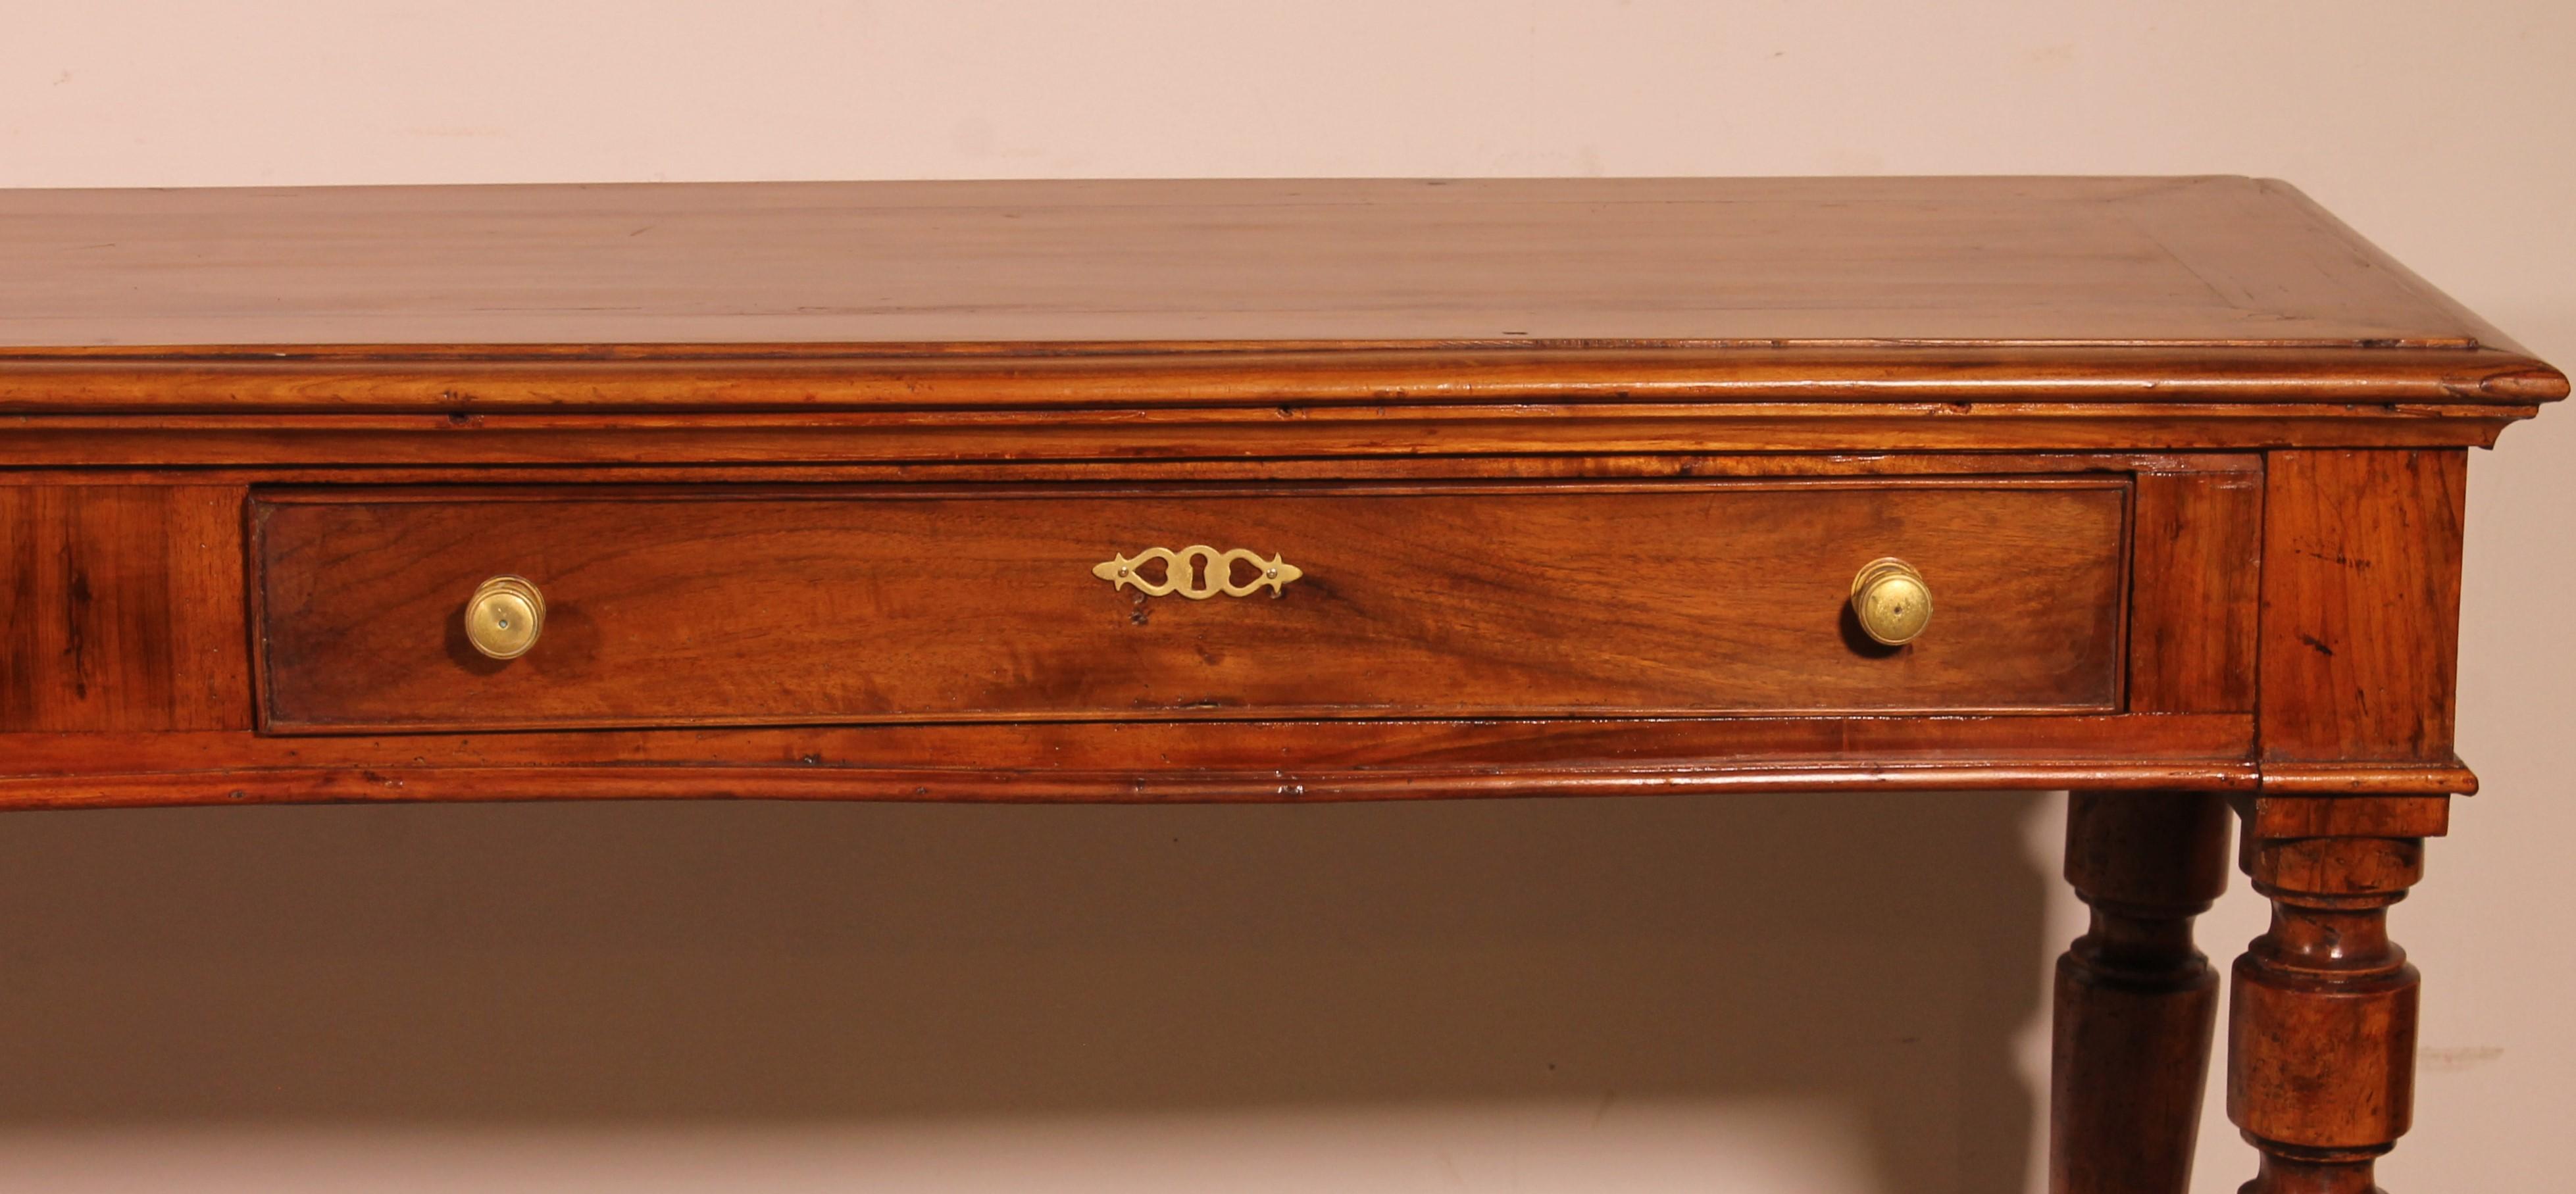 French Console In Cherry Wood With Two Drawers -19° Century From France